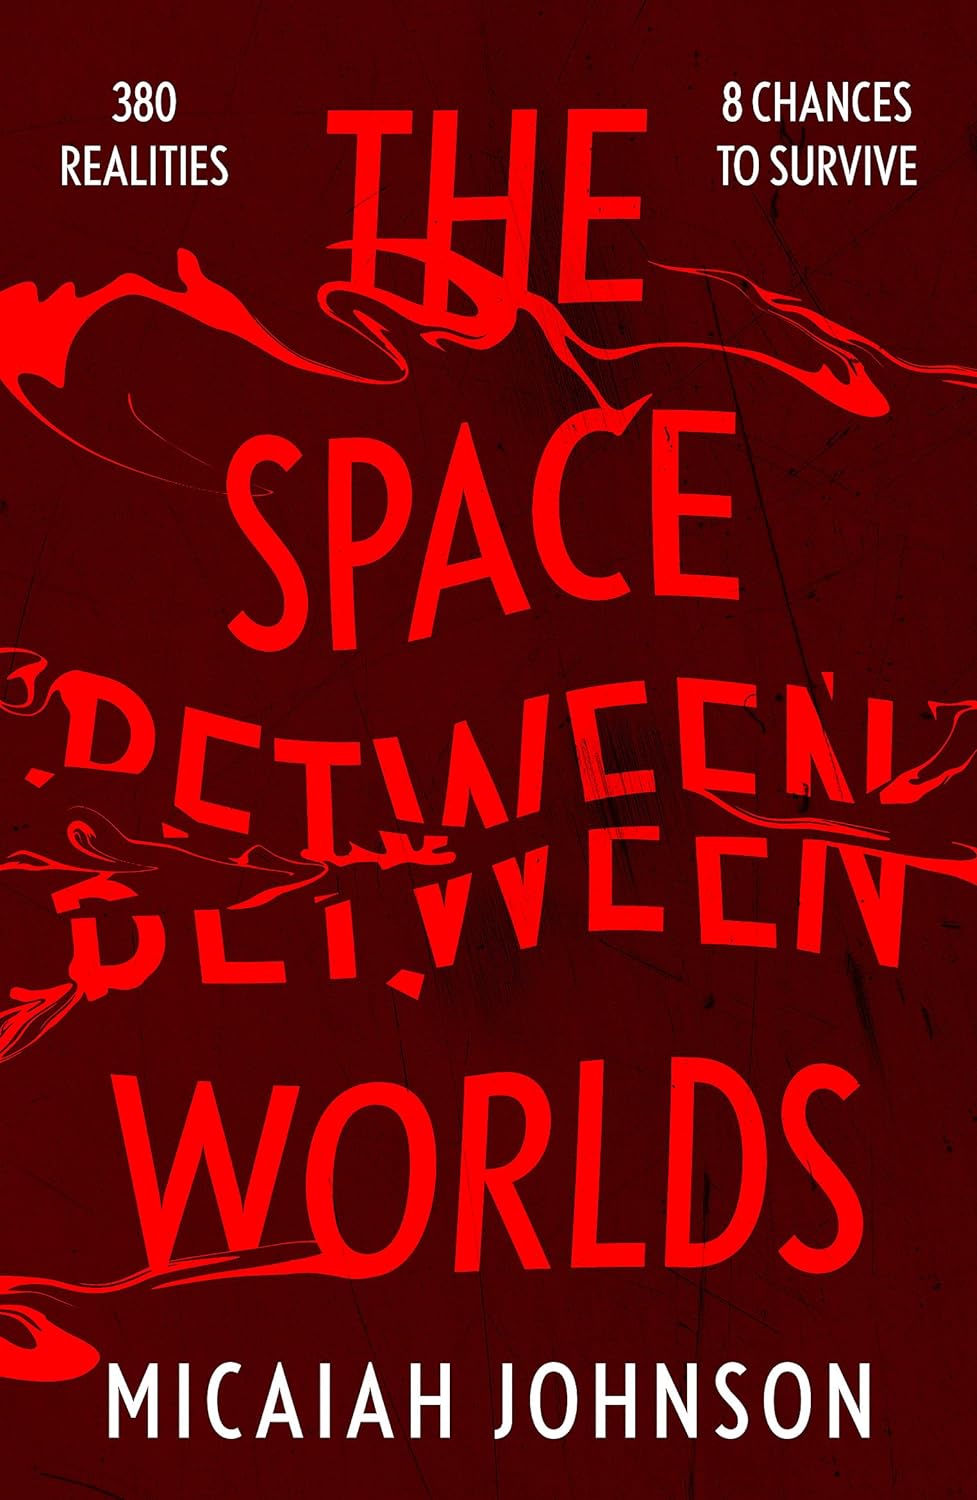 The dark red cover for The Space Between Worlds has the title splashed across the cover. White text reads "380 realities. 8 chances to survive."